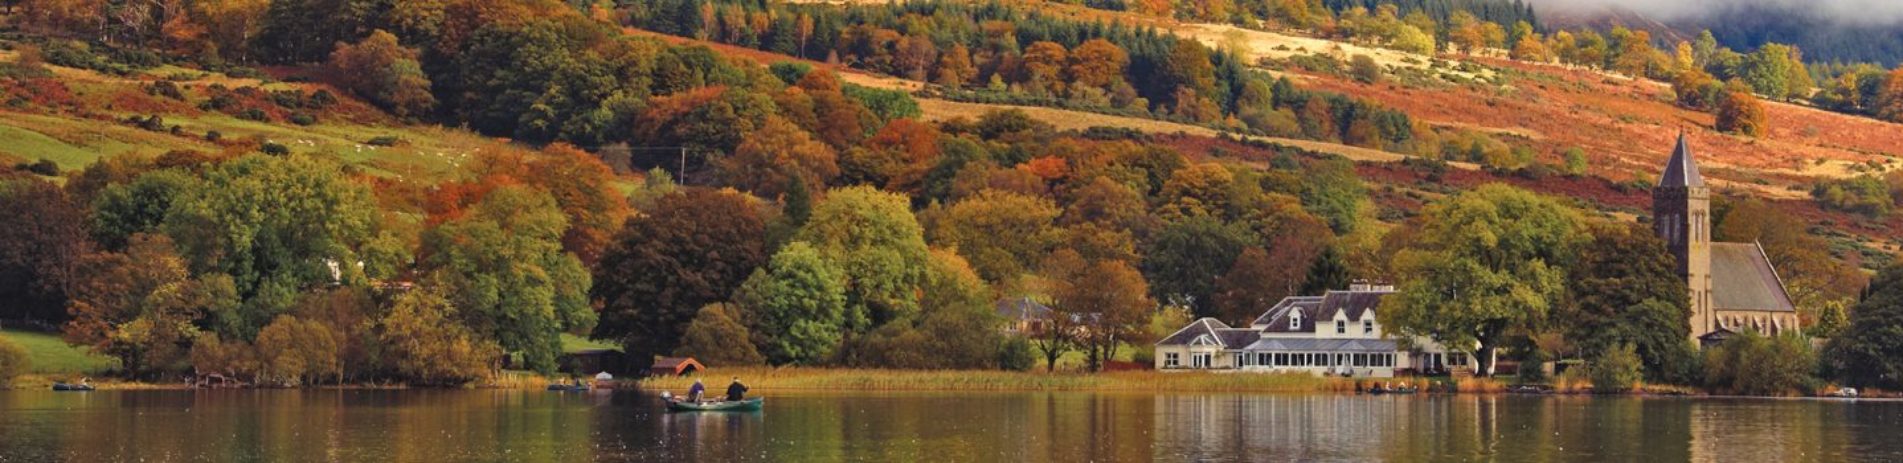 stunning-autumnal-landscape-of-lake-of-menteith-and-port-of-menteith-village-on-the-shore